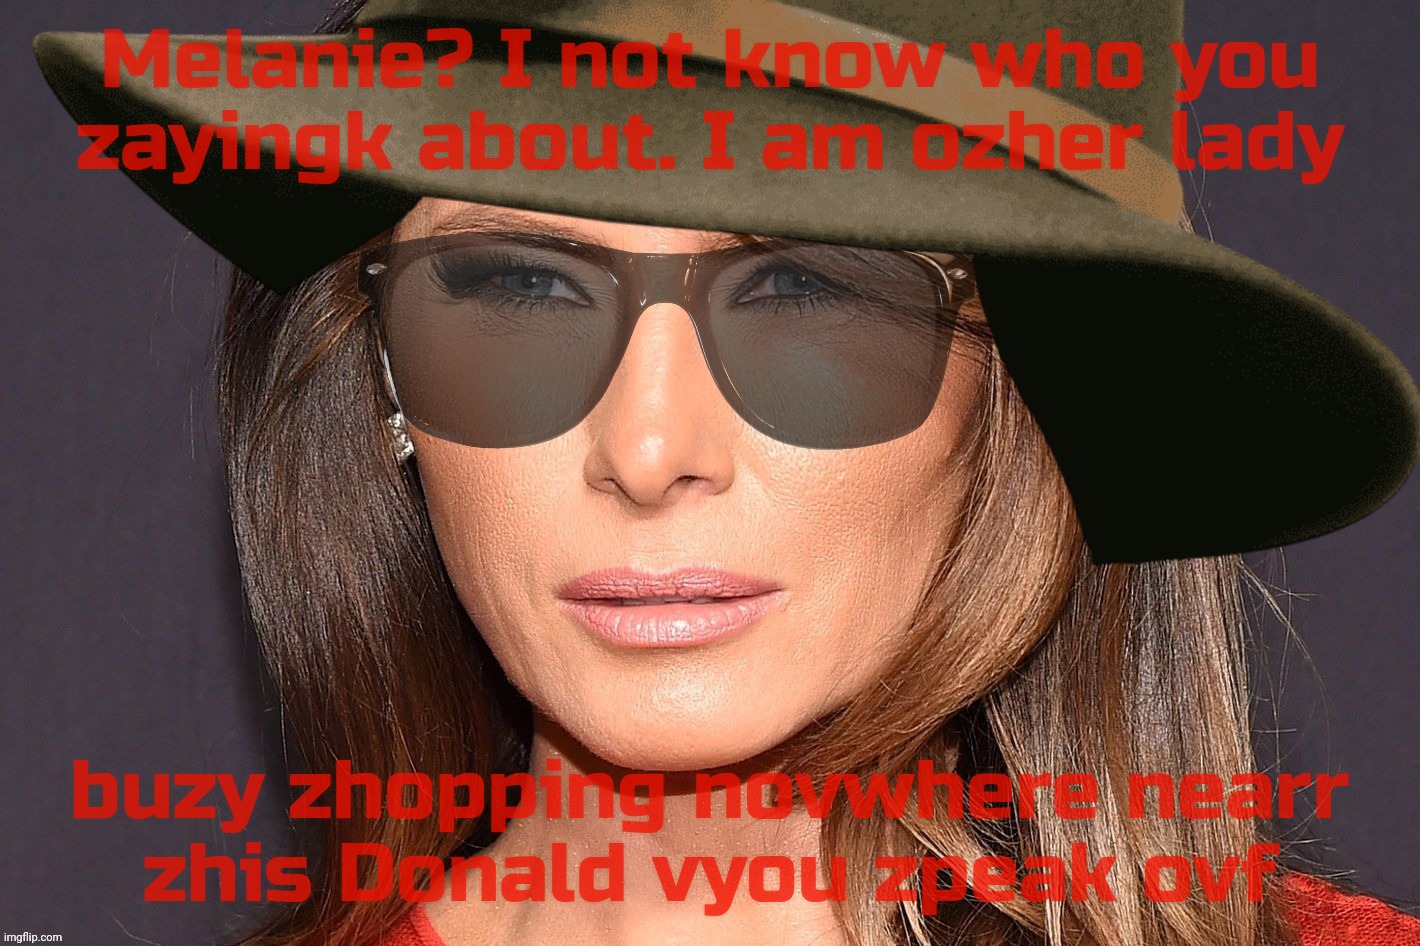 Former FLOTUS floats among us unseen near that bloated POS crust she would rather leave behind in the rusted dust | Melanie? I not know who you
zayingk about. I am ozher lady; buzy zhopping novwhere nearr
zhis Donald vyou zpeak ovf | image tagged in melania trump,melania,incognito,melodia incognito,trump,on a milk carton somewhere | made w/ Imgflip meme maker